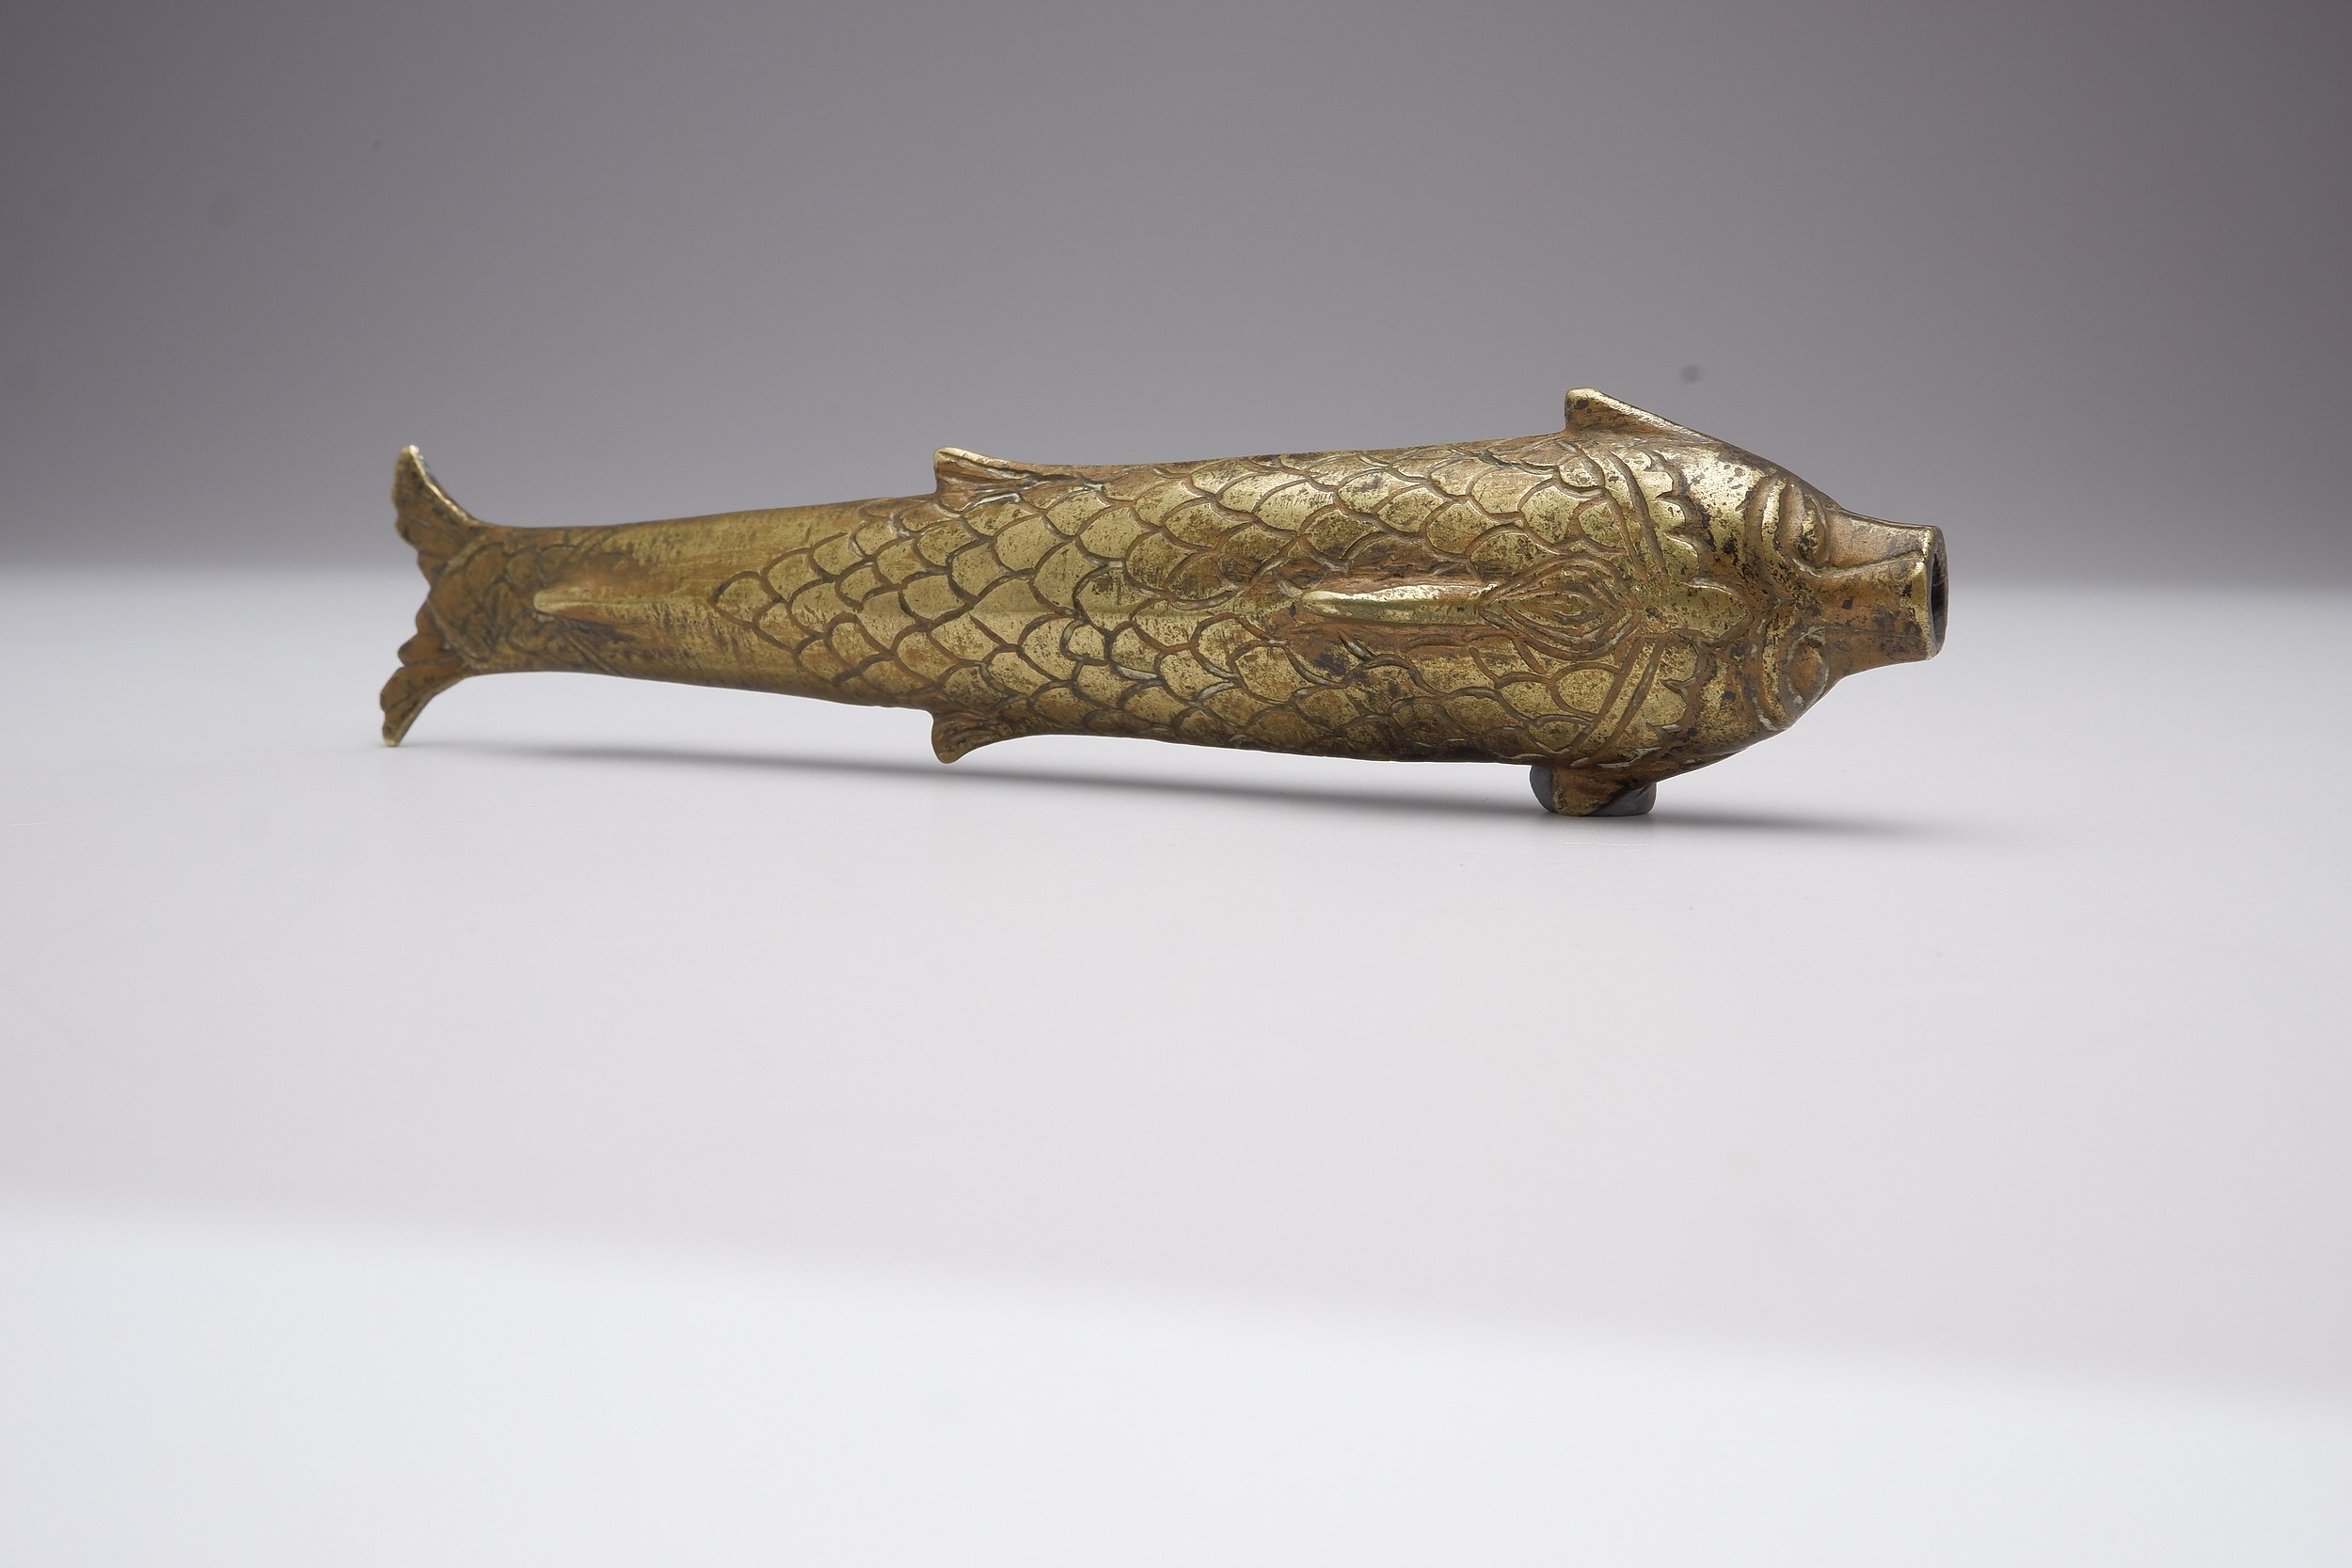 'Indian Mughal Brass or Bronze Powder Flask in the Form of a Fish 18th/19th Century'